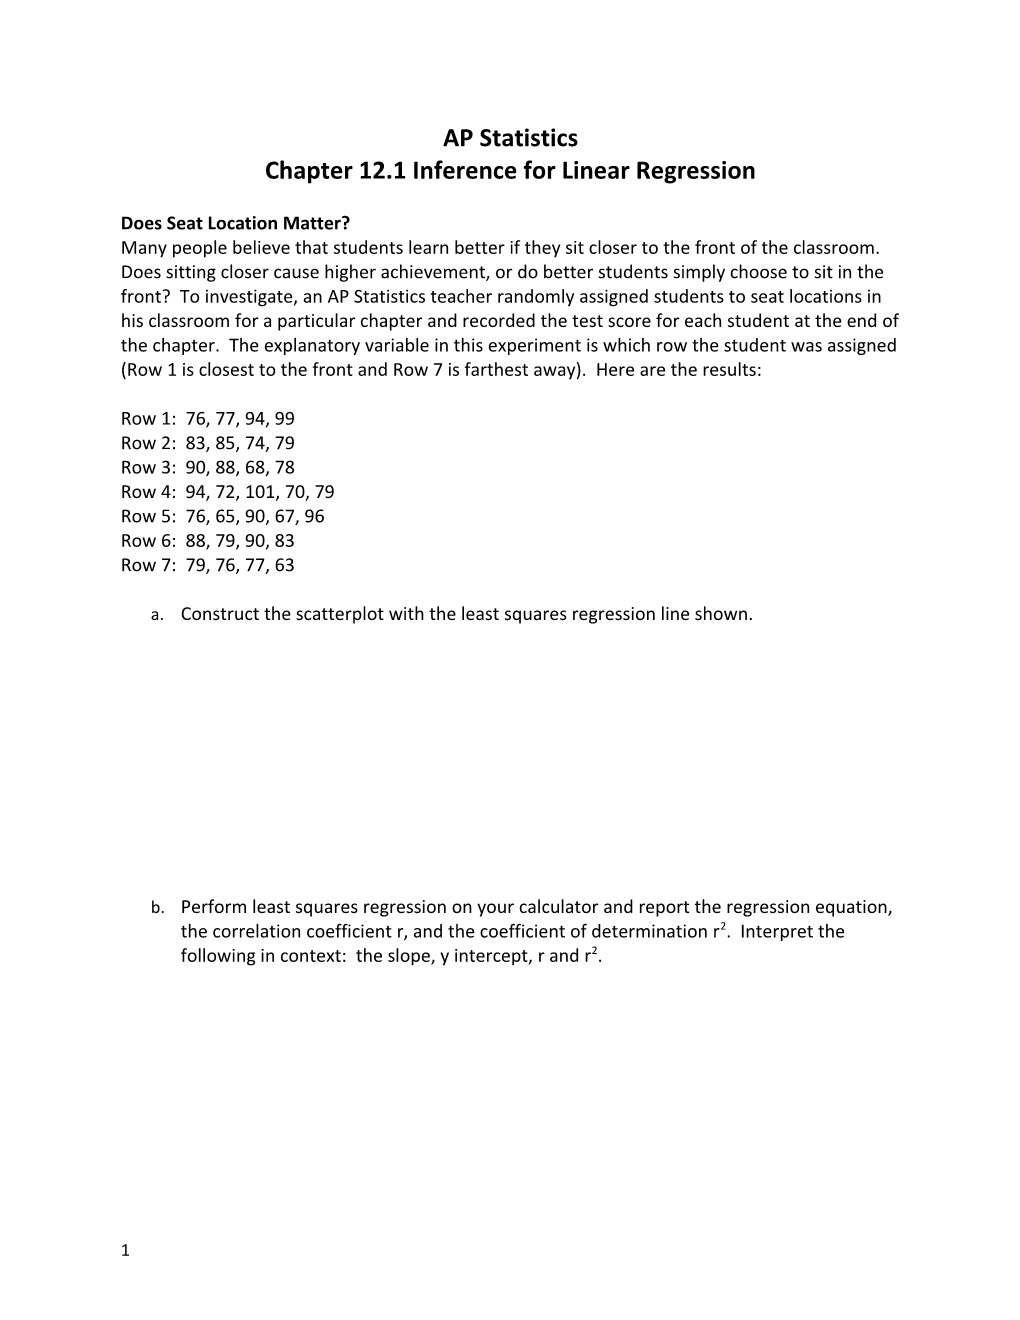 Chapter 12.1 Inference for Linear Regression